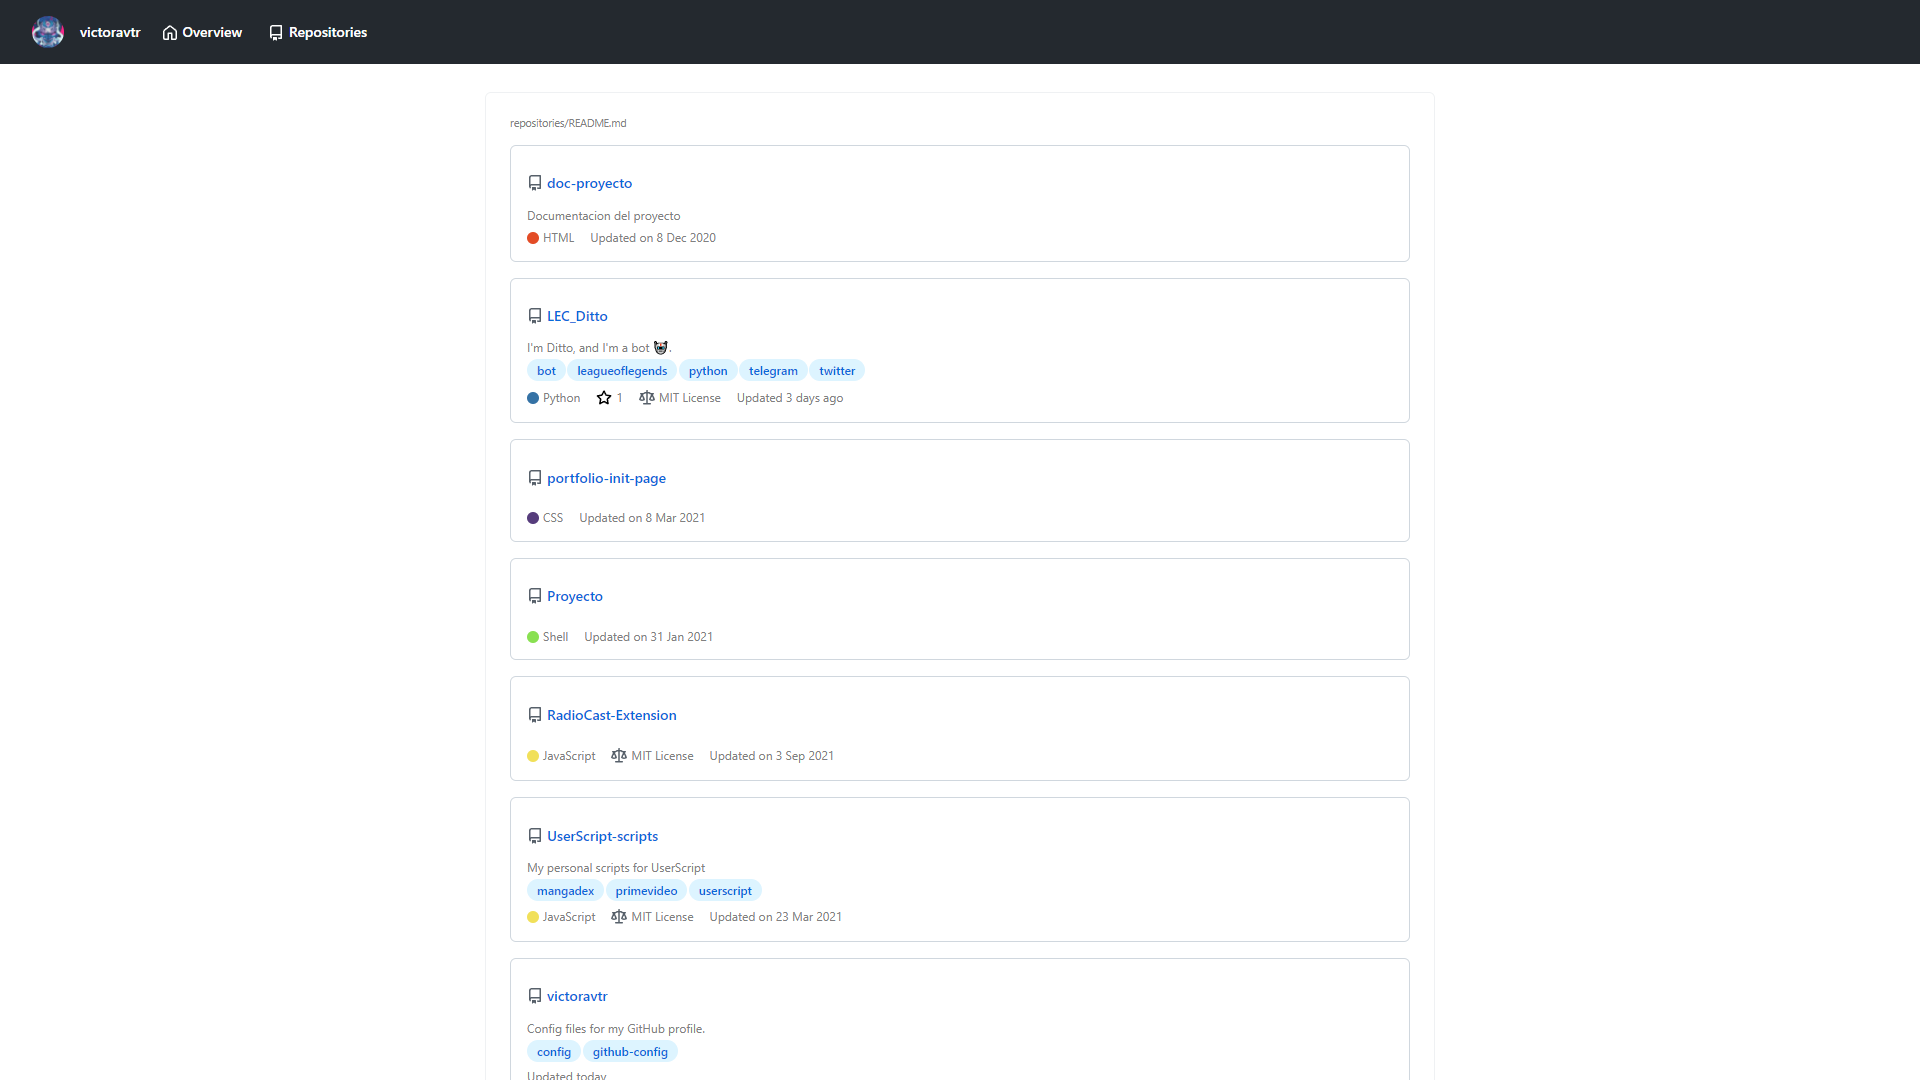 Repositories page